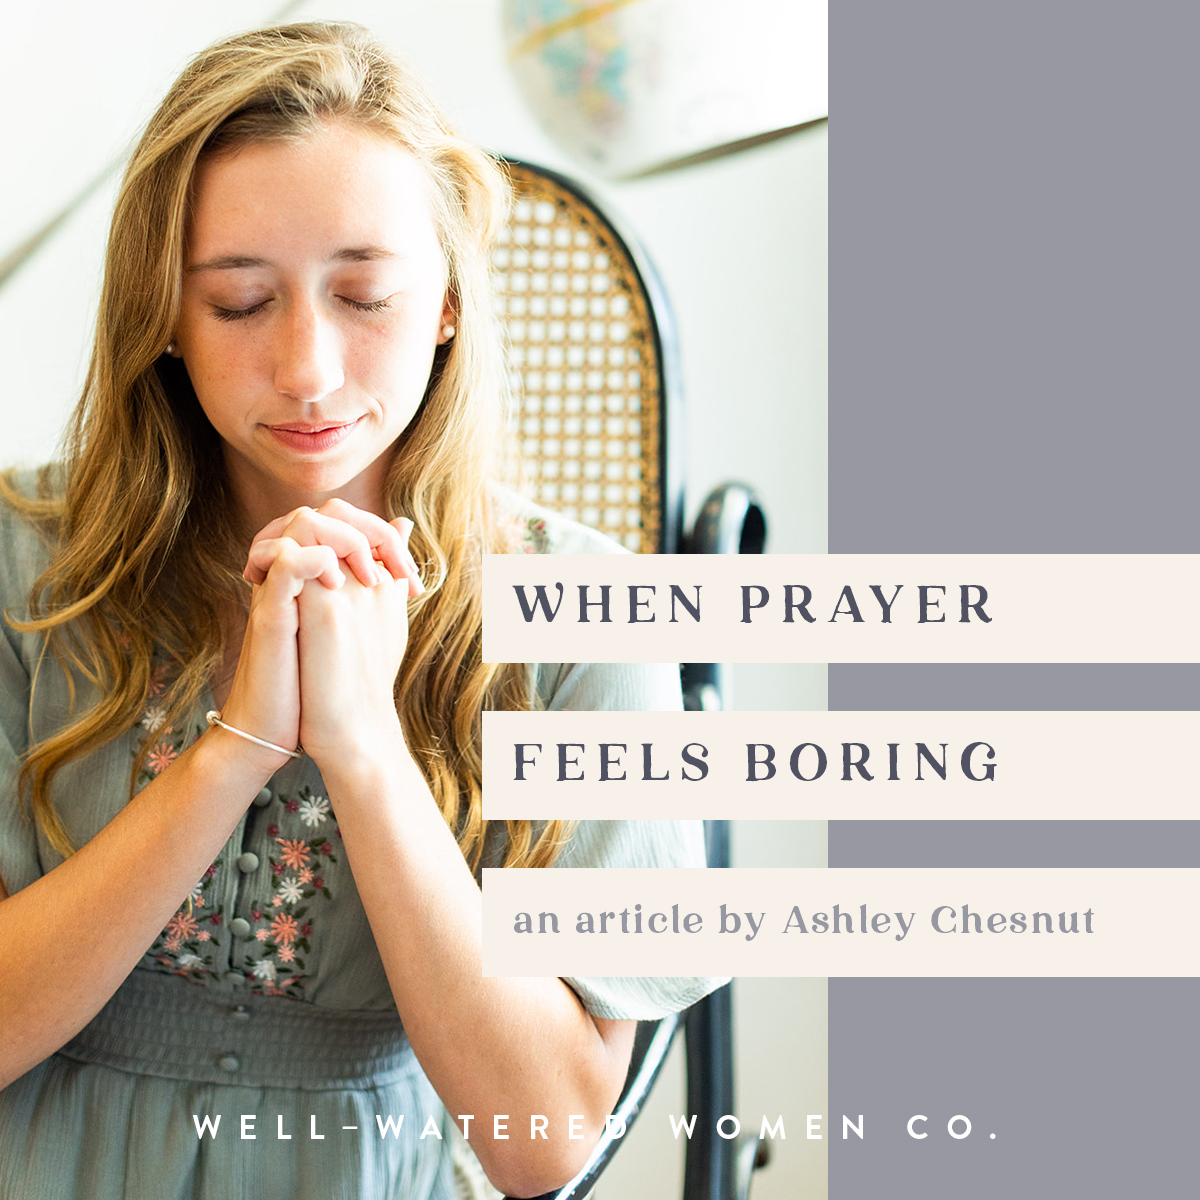 When Prayer Feels Boring - an article from Well-Watered Women